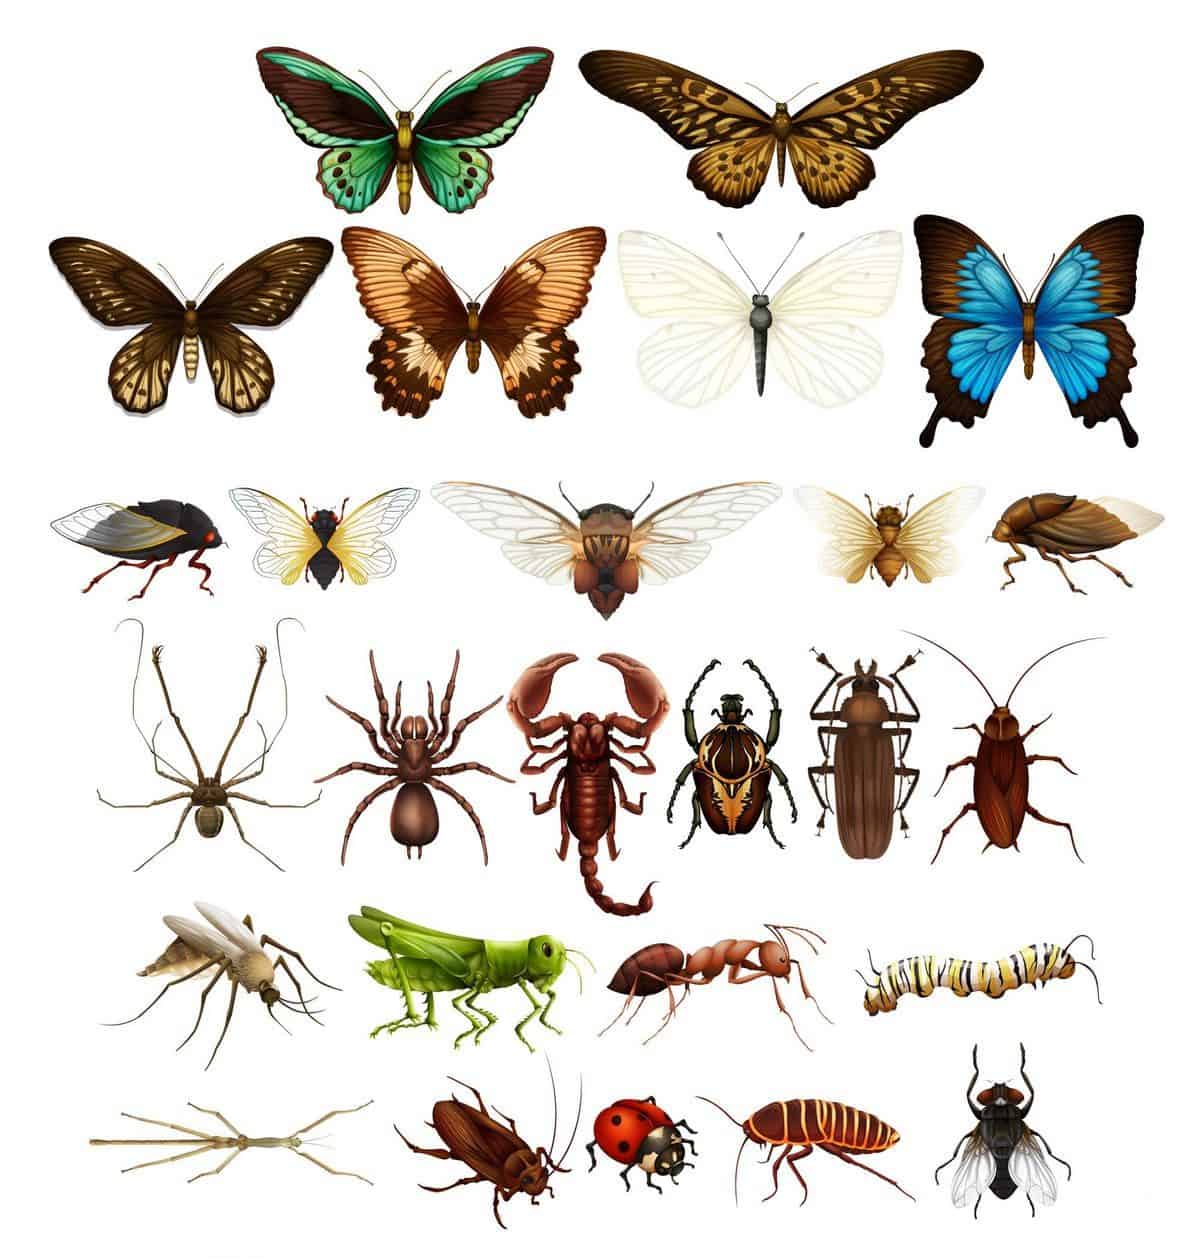 Wild insects in various types